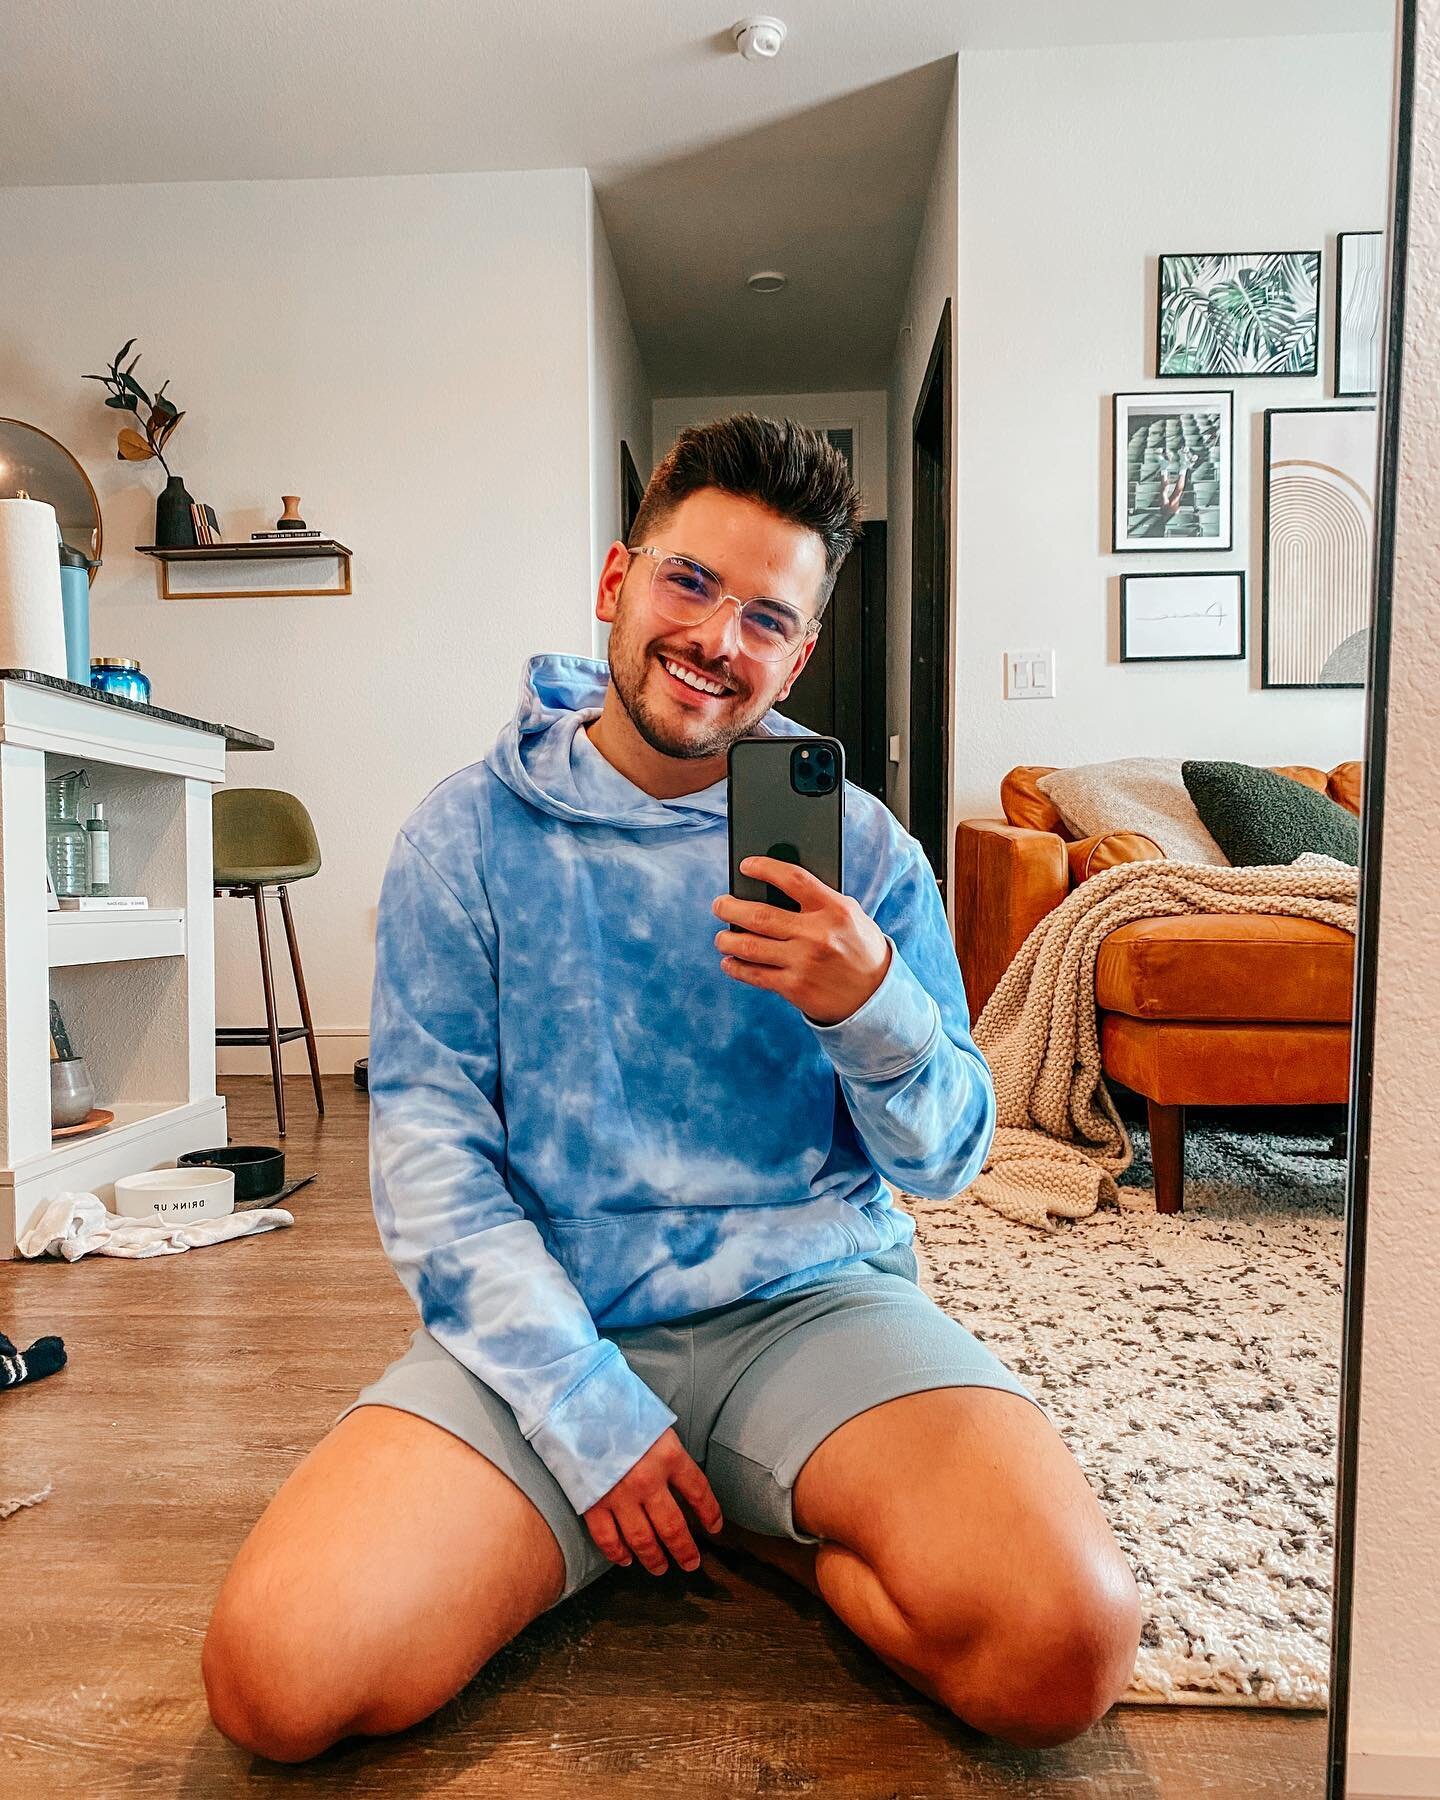 coming to you live from the floor of my dirty apartment 😂 honestly this week just hasn&rsquo;t been IT for me but what can you do! 🤷🏻&zwj;♂️

would love to hear something positive or exciting going on in your life 👏🏽⬇️ let me know below so I can